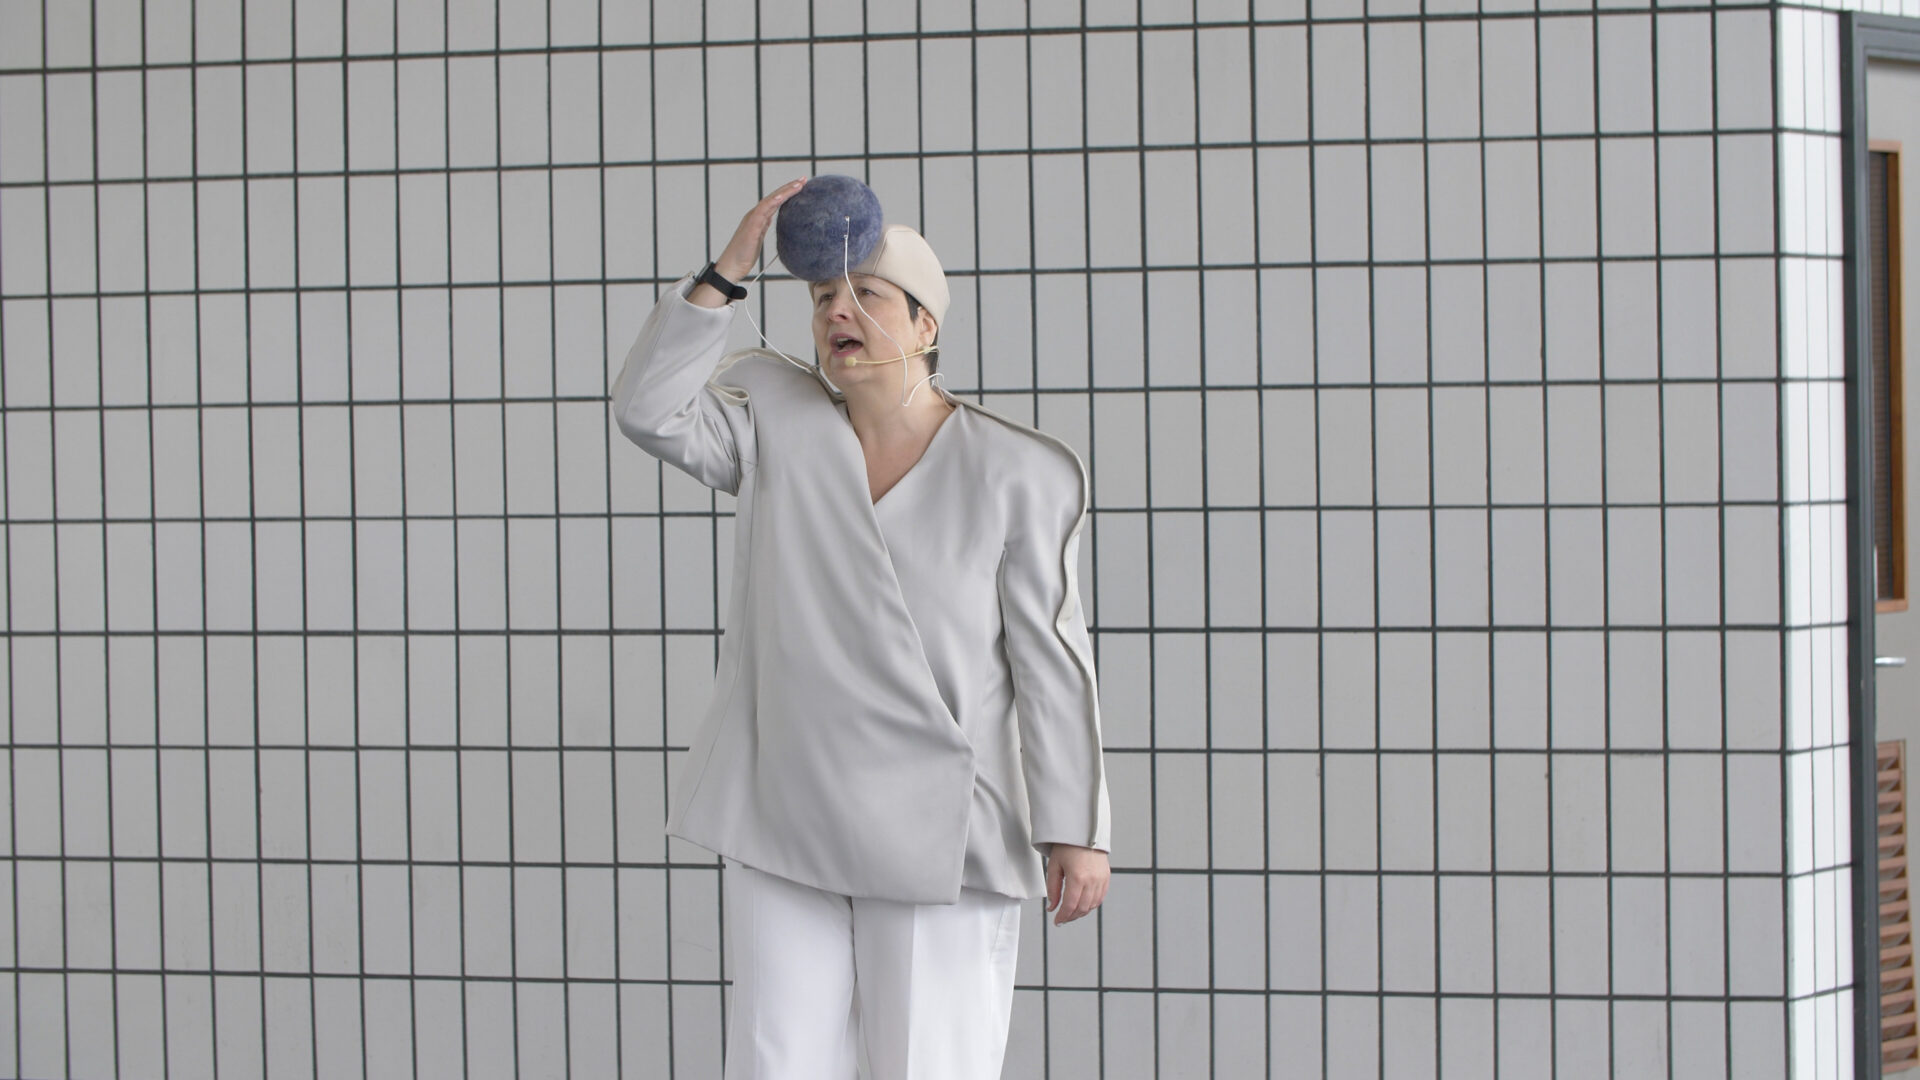 Image taken from a performance at the Bus Station, the artist is dressed in a white sound suit touching a large grey pom pom on their hat.